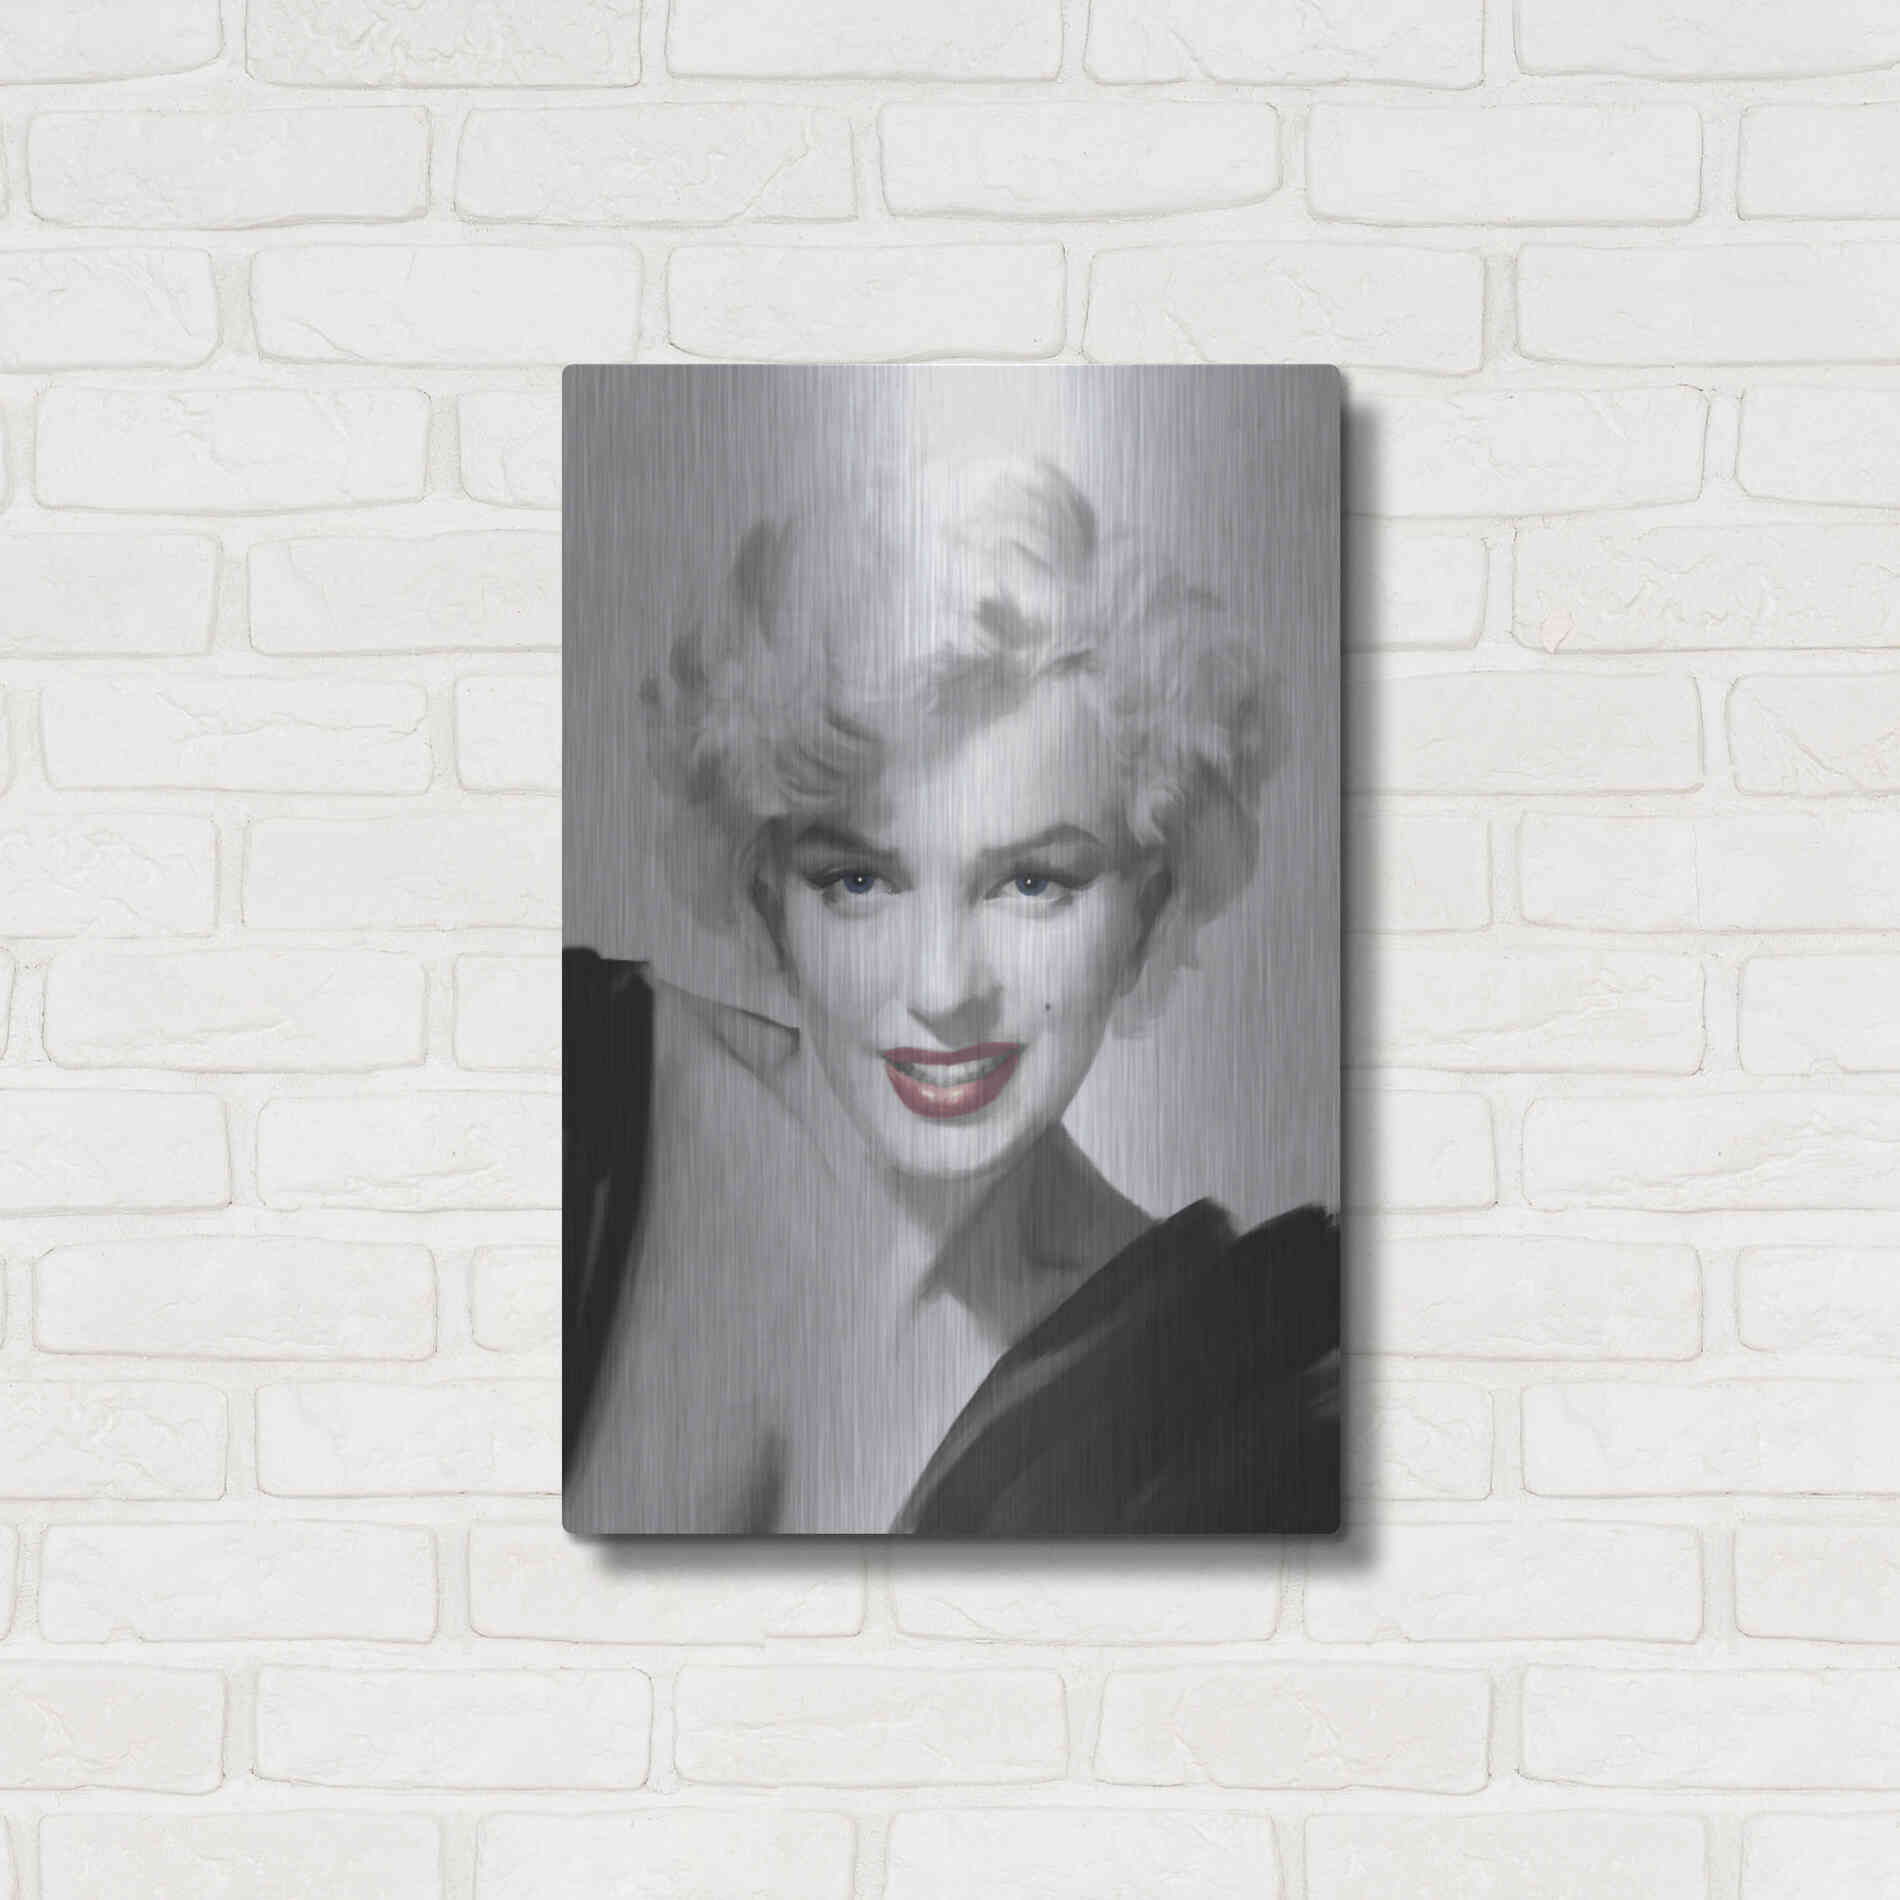 Luxe Metal Art 'The Look Red Lips' by Chris Consani, Metal Wall Art,16x24